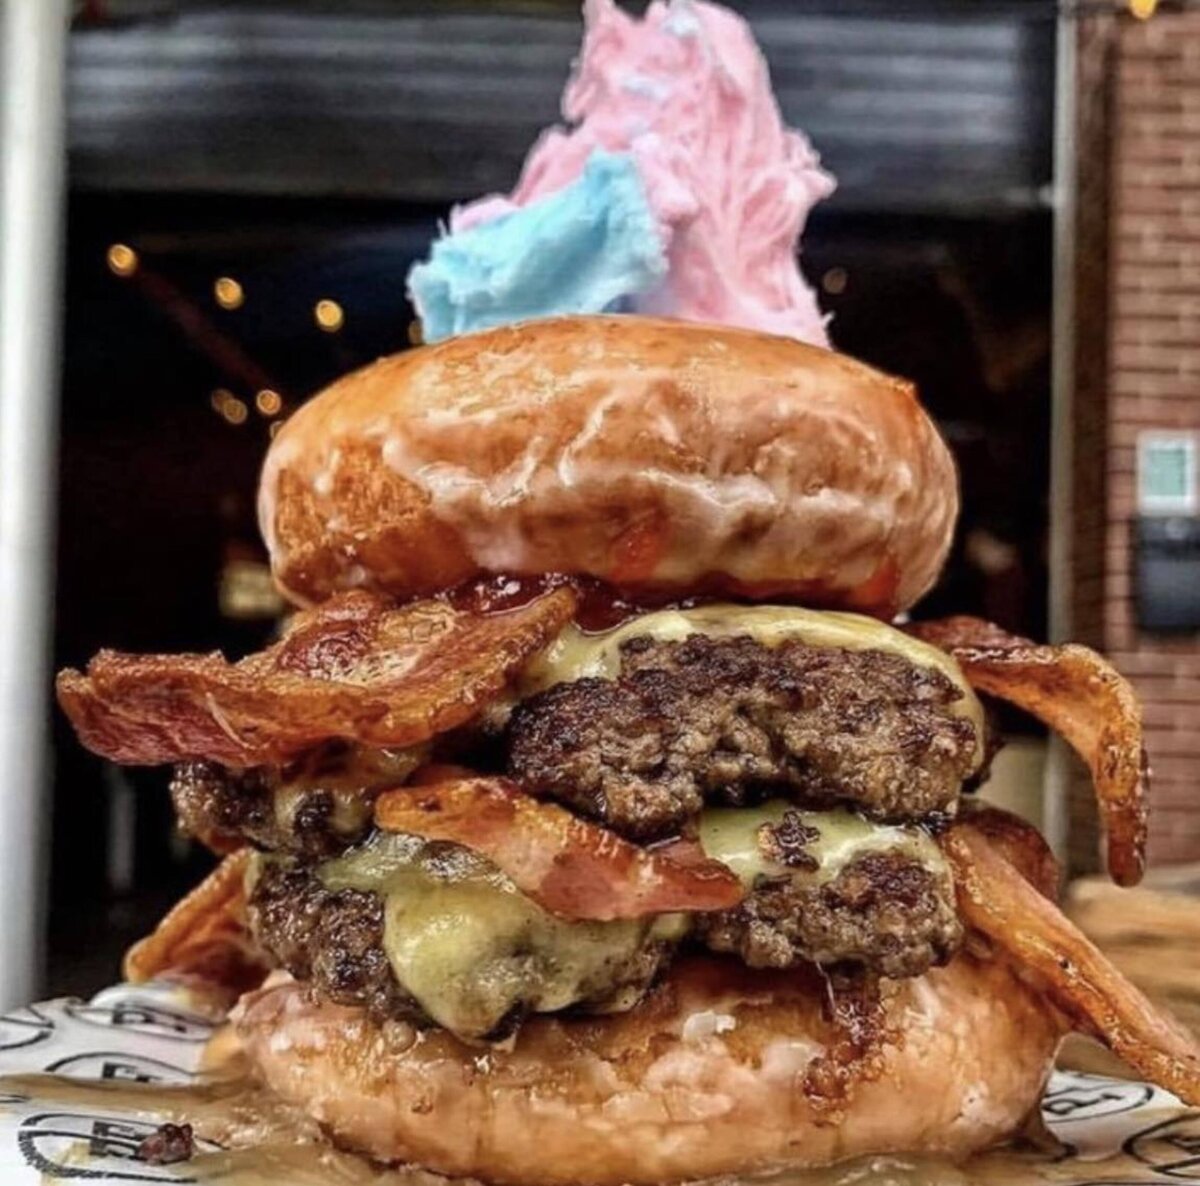 Double patty burger with glazed doughnuts for the bun with candy floss on top